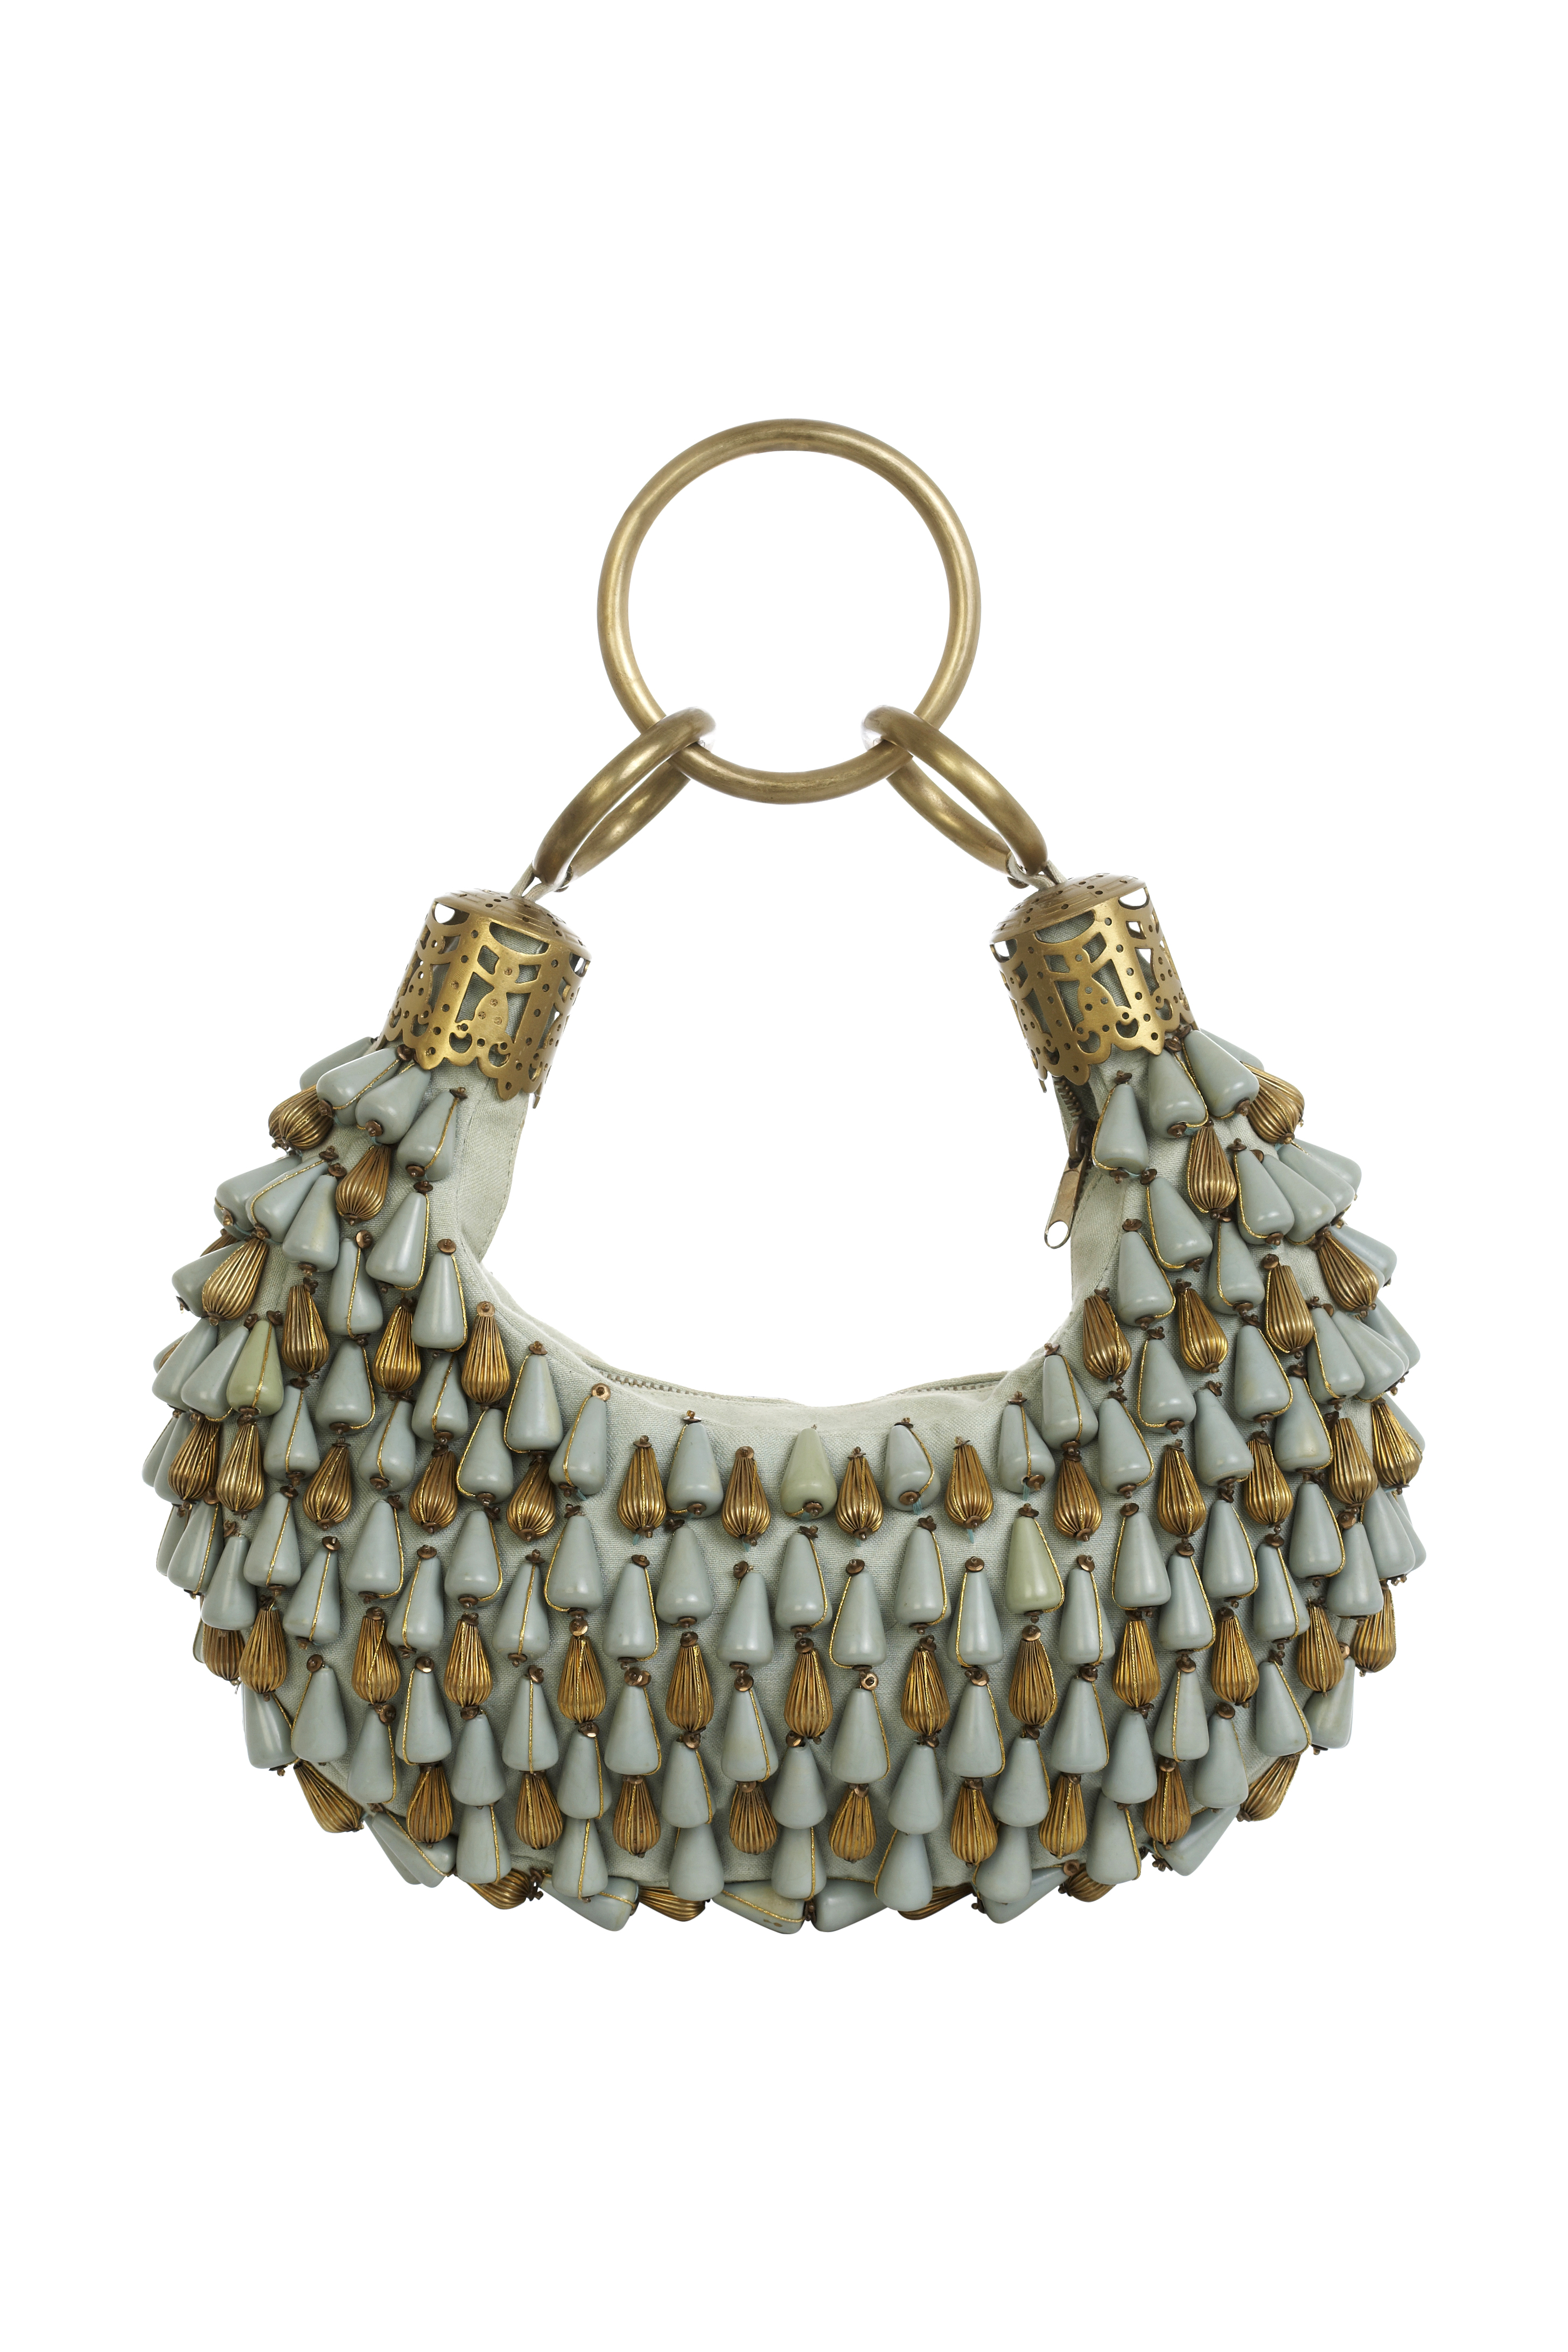 Chloe moss green and gold beaded bag with bronze ring handle